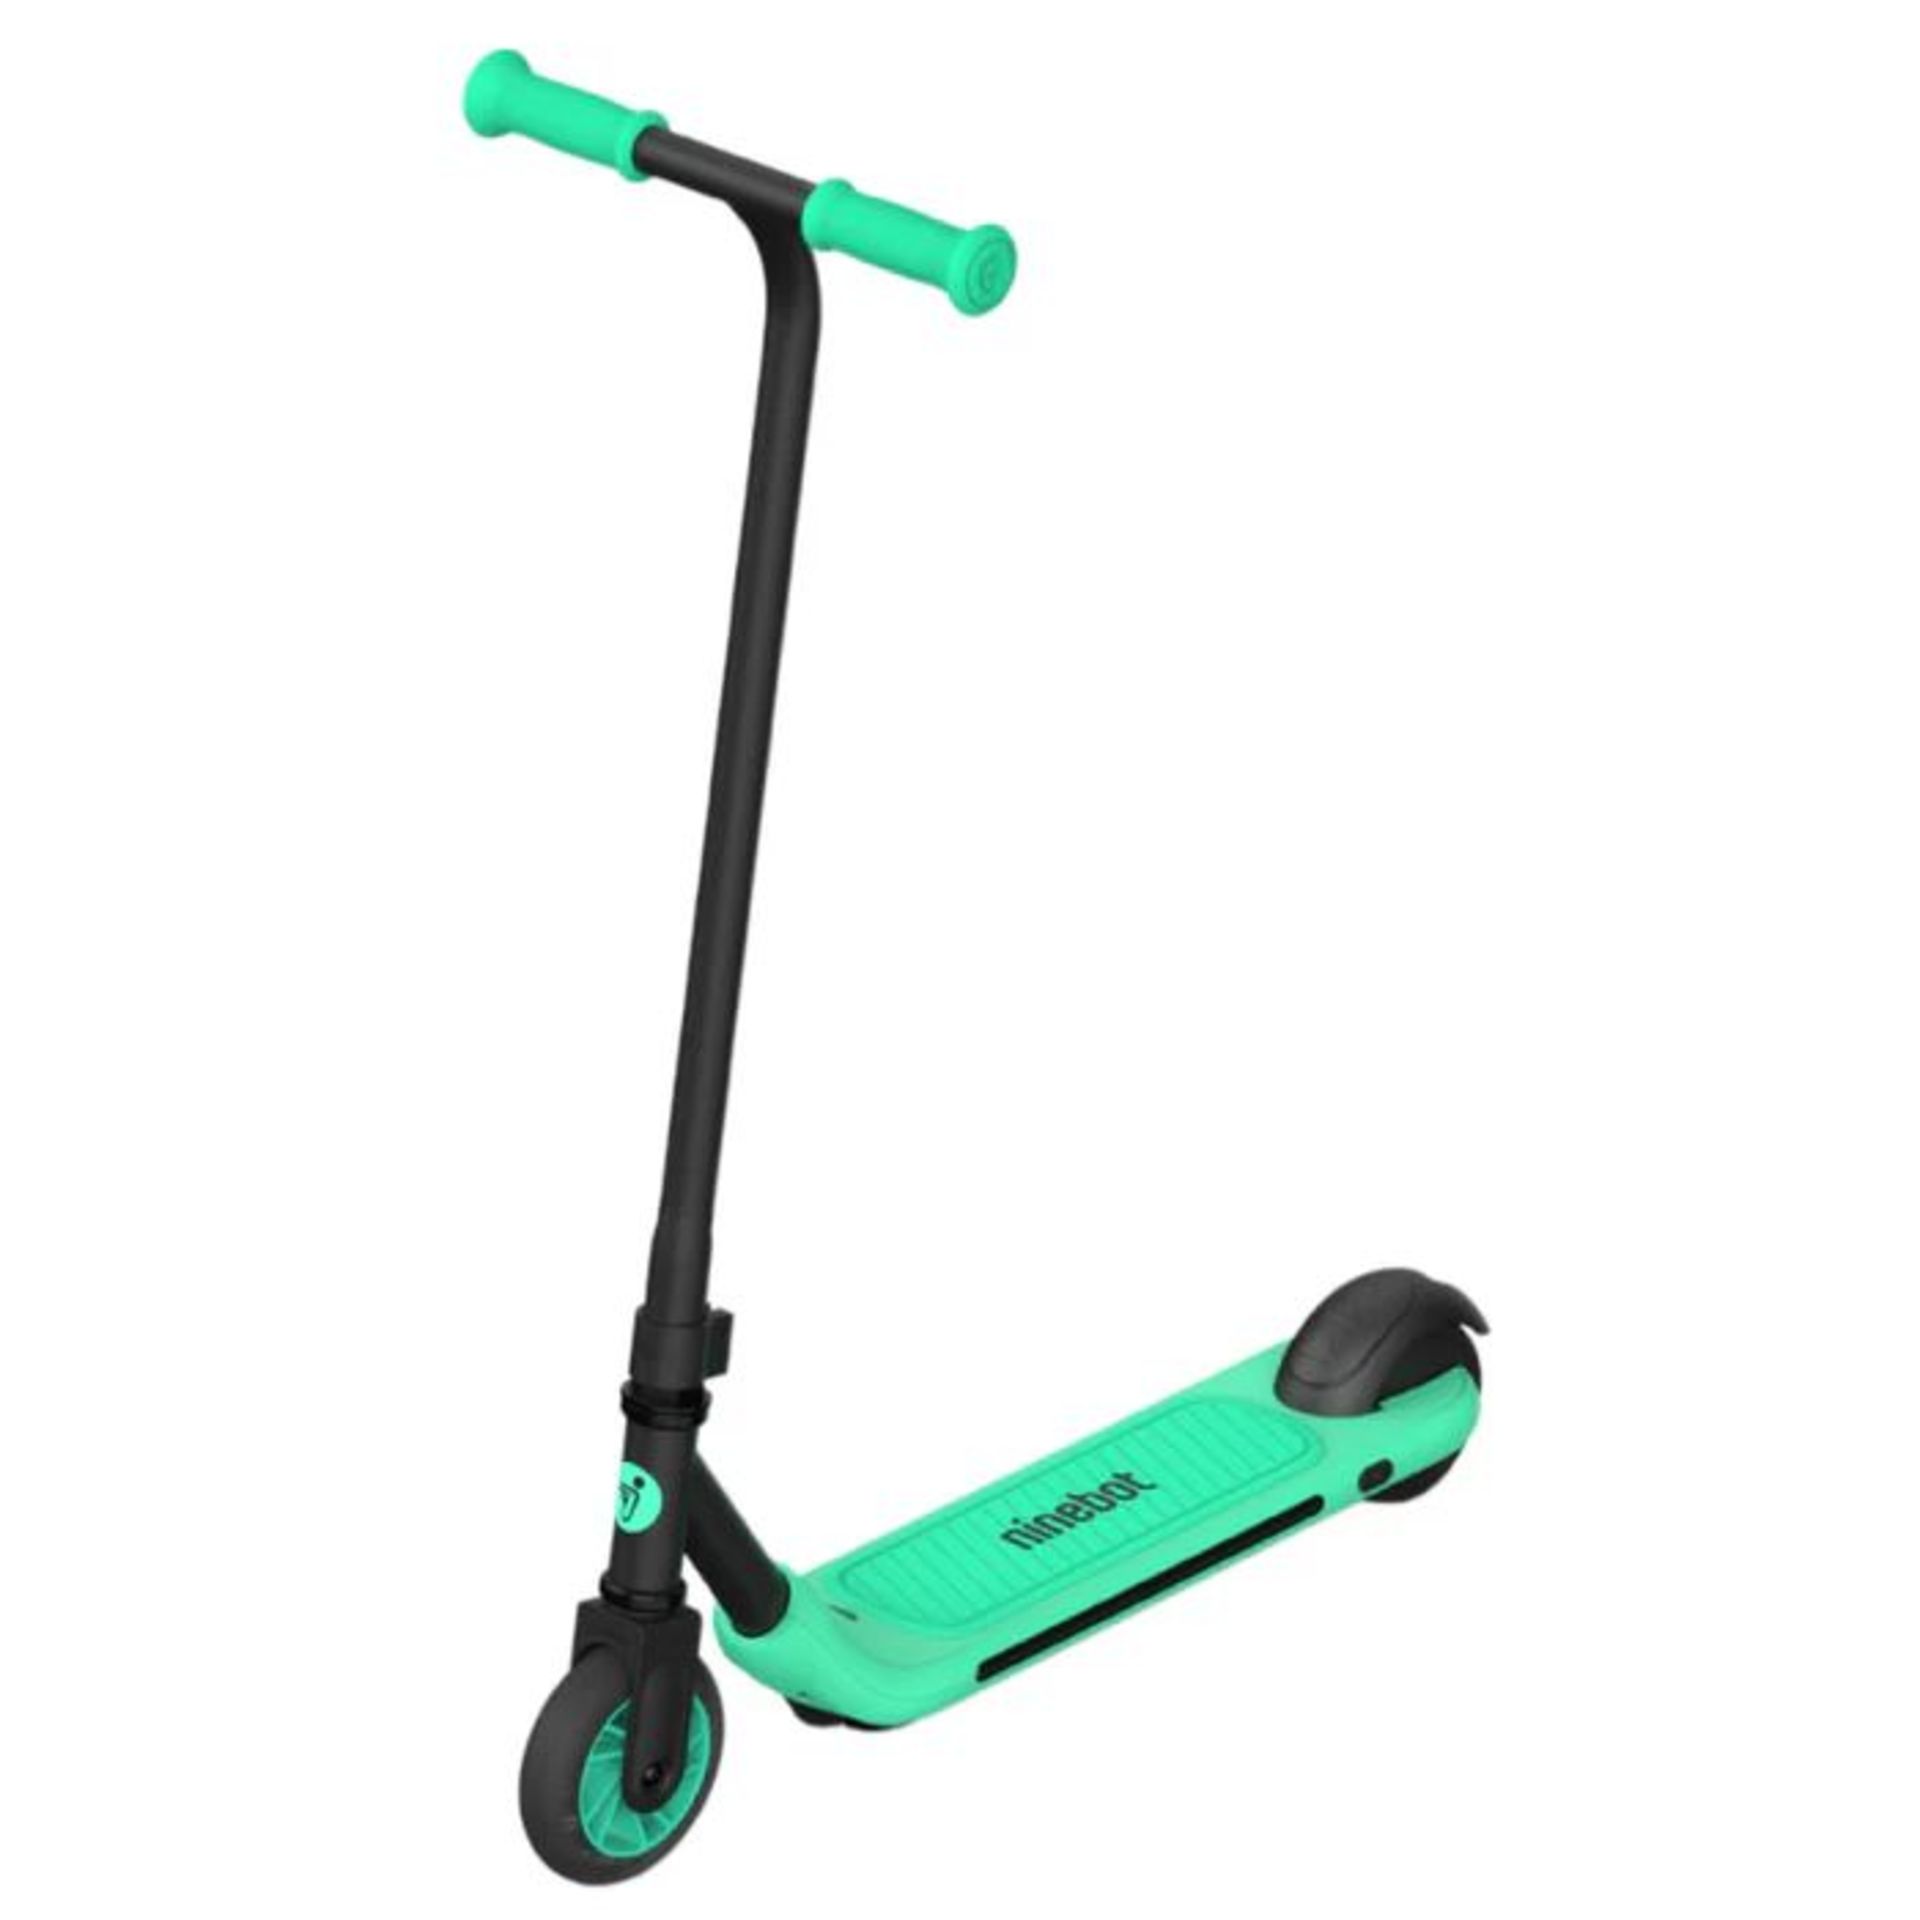 SEGWAY NINEBOT ELECTRIC ASSIST E-KICK SCOOTER ((FACTORY RECERTIFIED - 30 DAY WARRANTY INCLUDED)